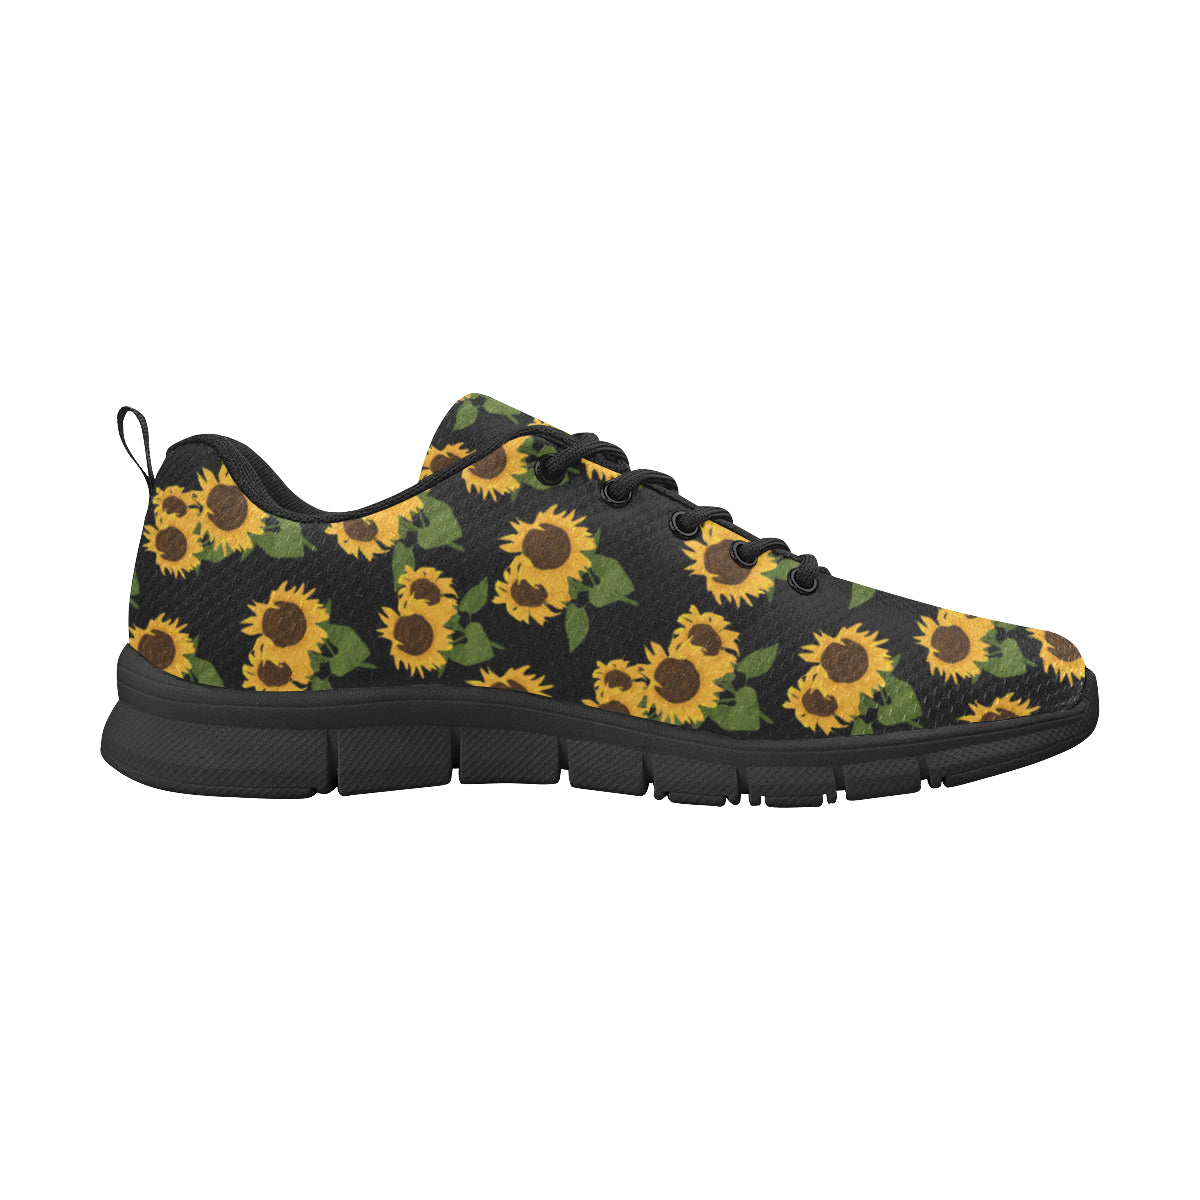 Sunflower Women Sneakers, Black Yellow Floral, Custom Floral Cute Women's Breathable Colorful Vegan Mesh Canvas Athletic Sports Shoes Starcove Fashion